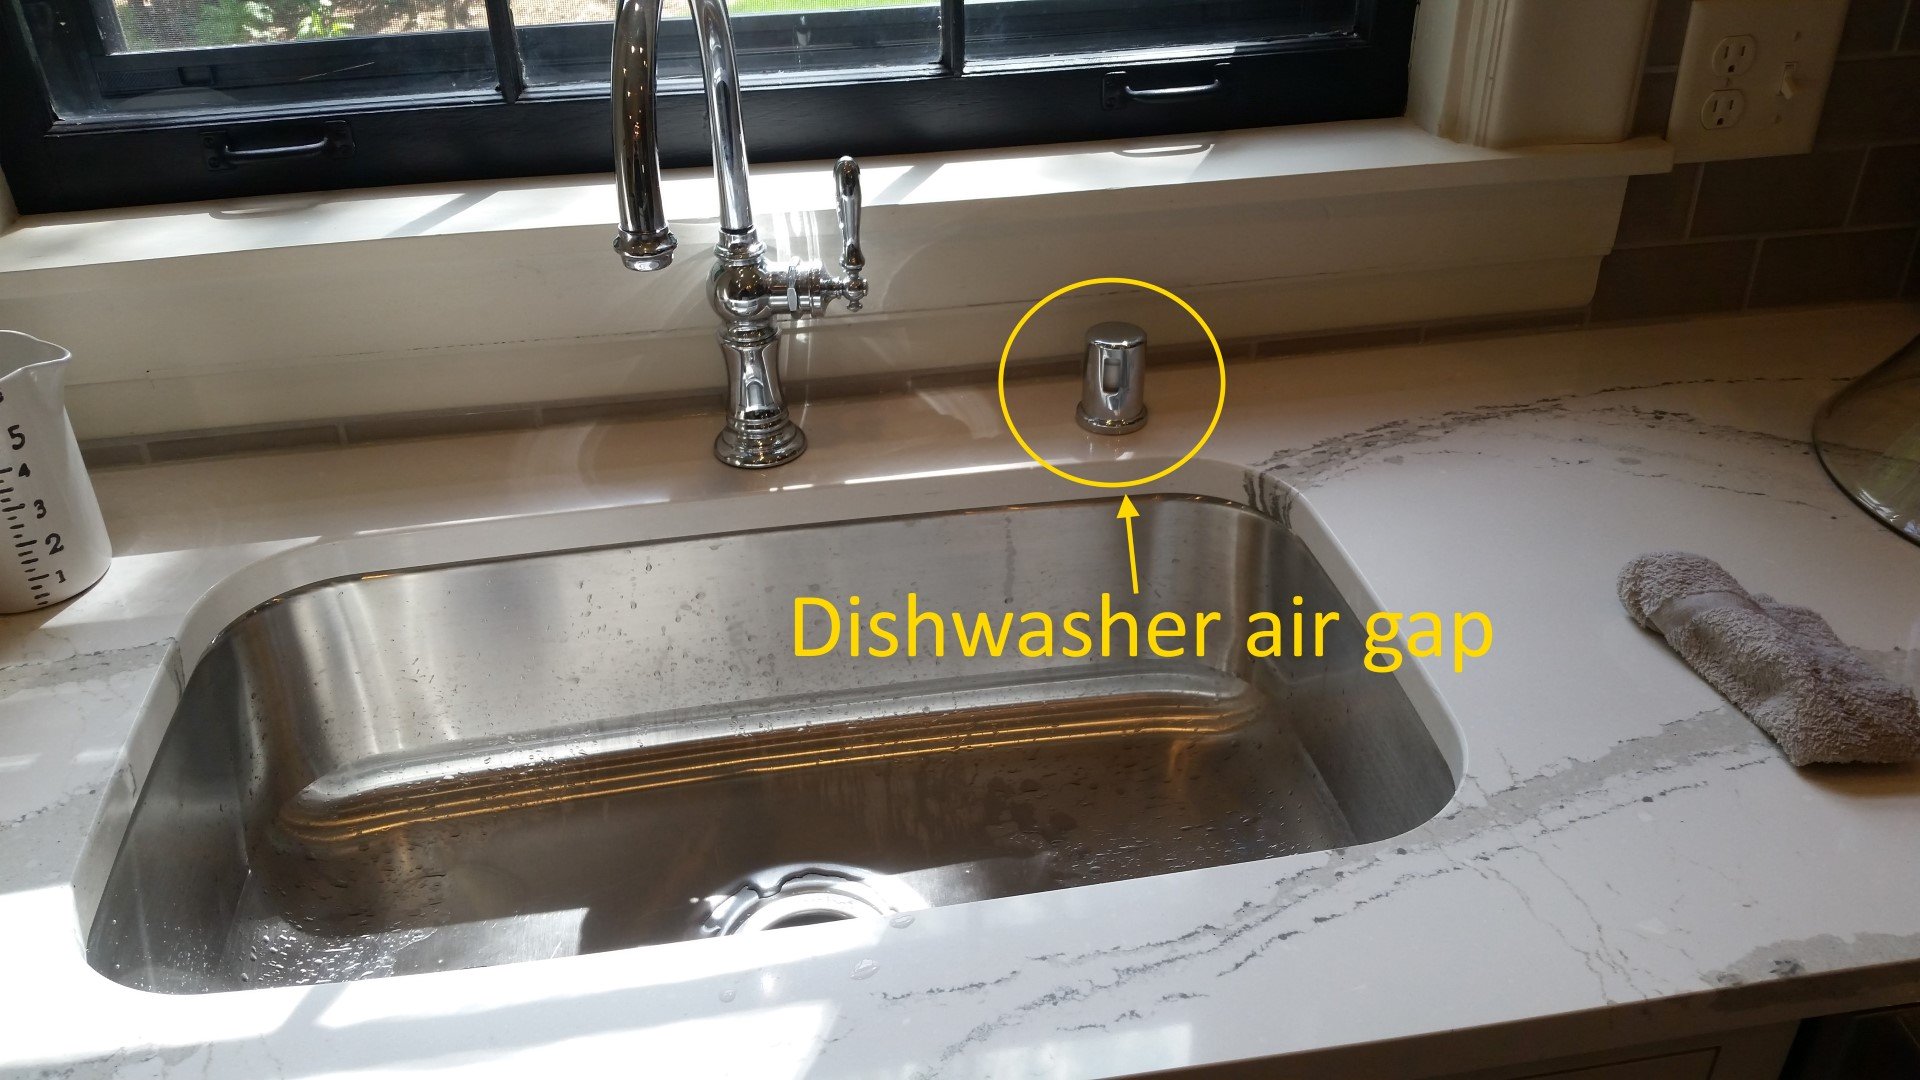 A Common Dishwasher Installation Defect